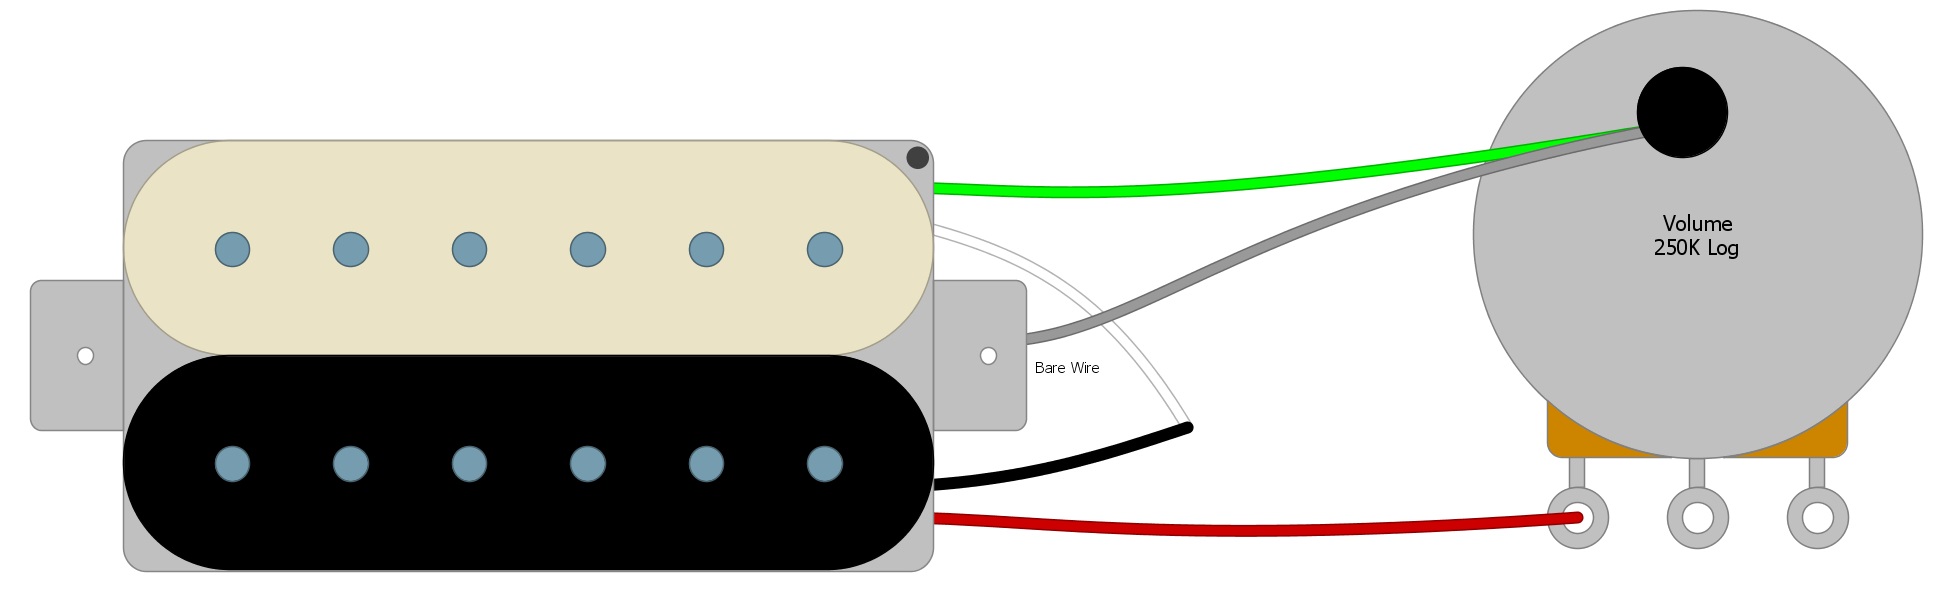 Dimarzio Pickup Wiring Diagram from humbuckersoup.com